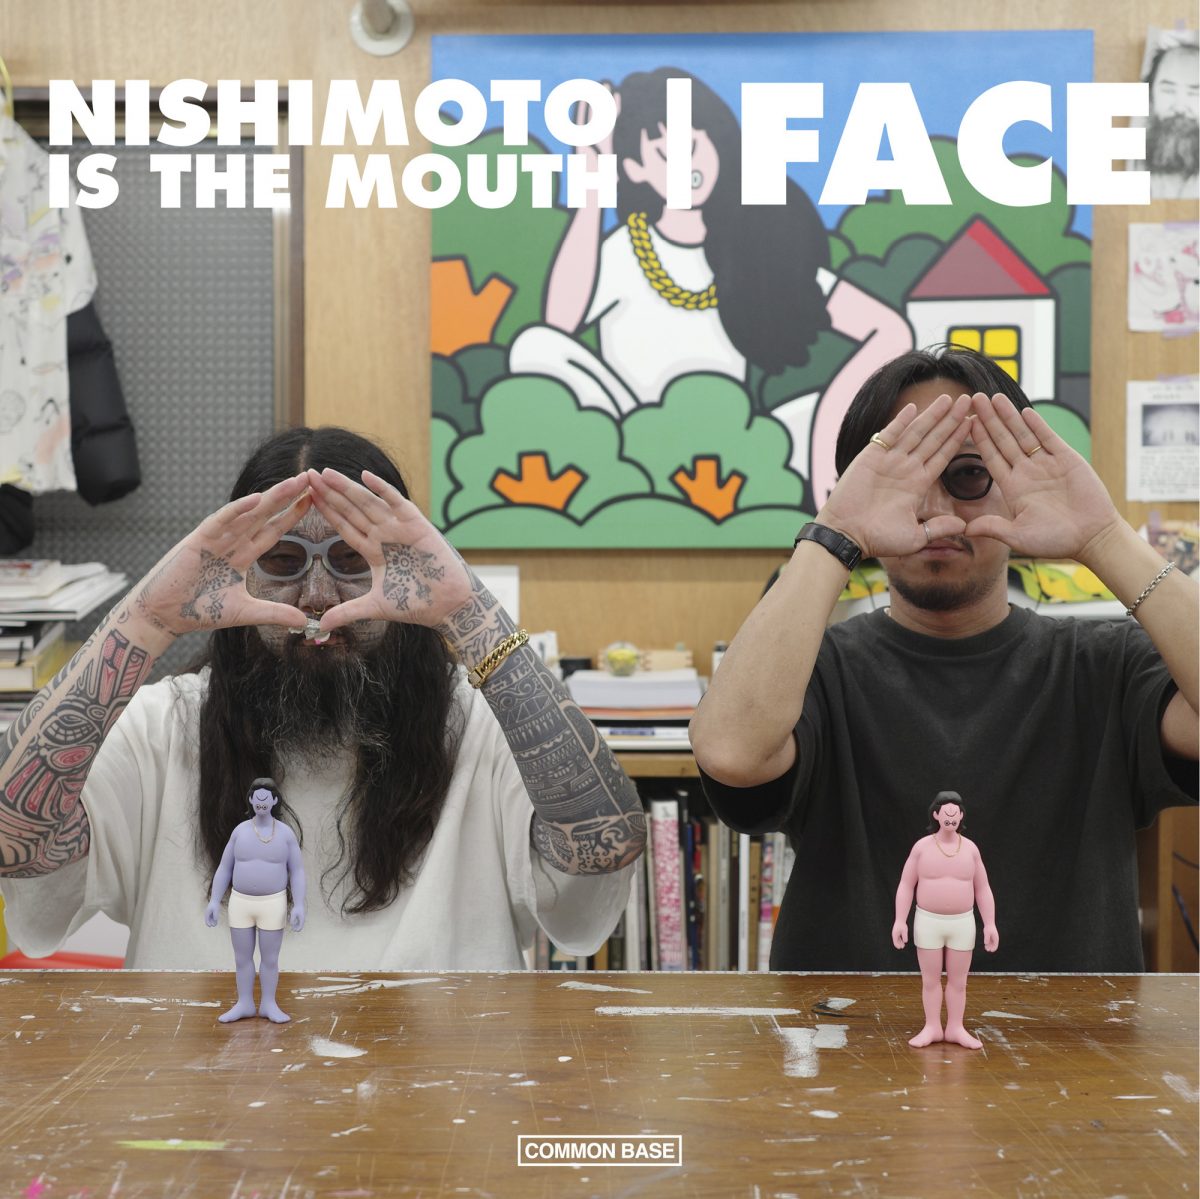 NISHIMOTO IS THE MOUTH × face Figure | yasbil.org